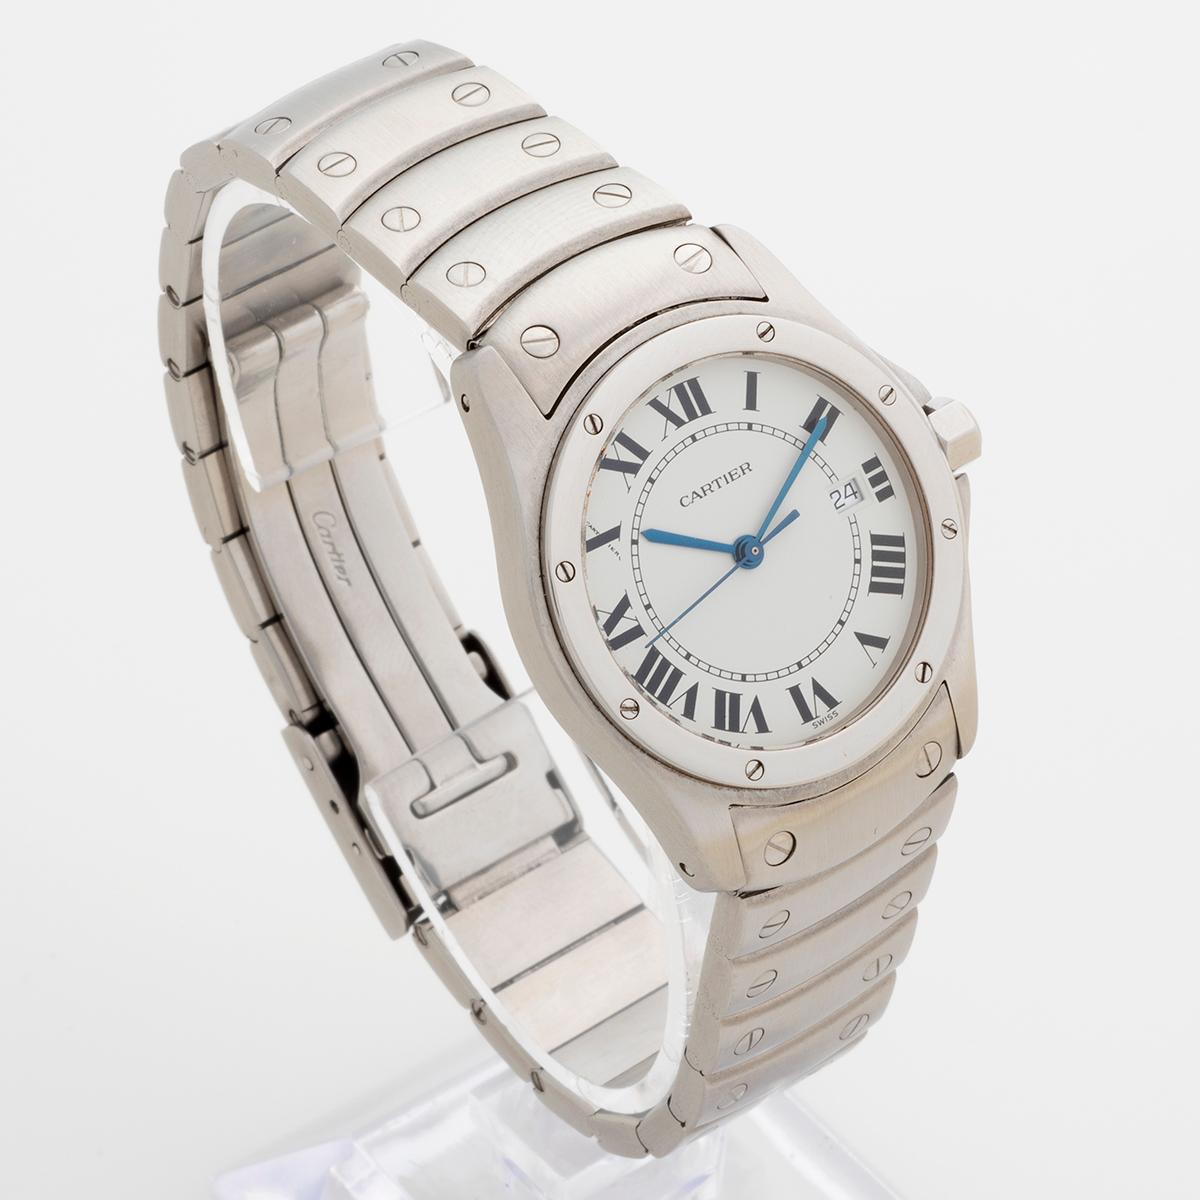 Our iconic Cartier Santos ronde quartz in stainless steel, with stainless steel bracelet is the larger 29mm case version, suitable for a lady who prefers a larger watch or a mid size gent's. Presented in outstanding condition for its age, our Santos